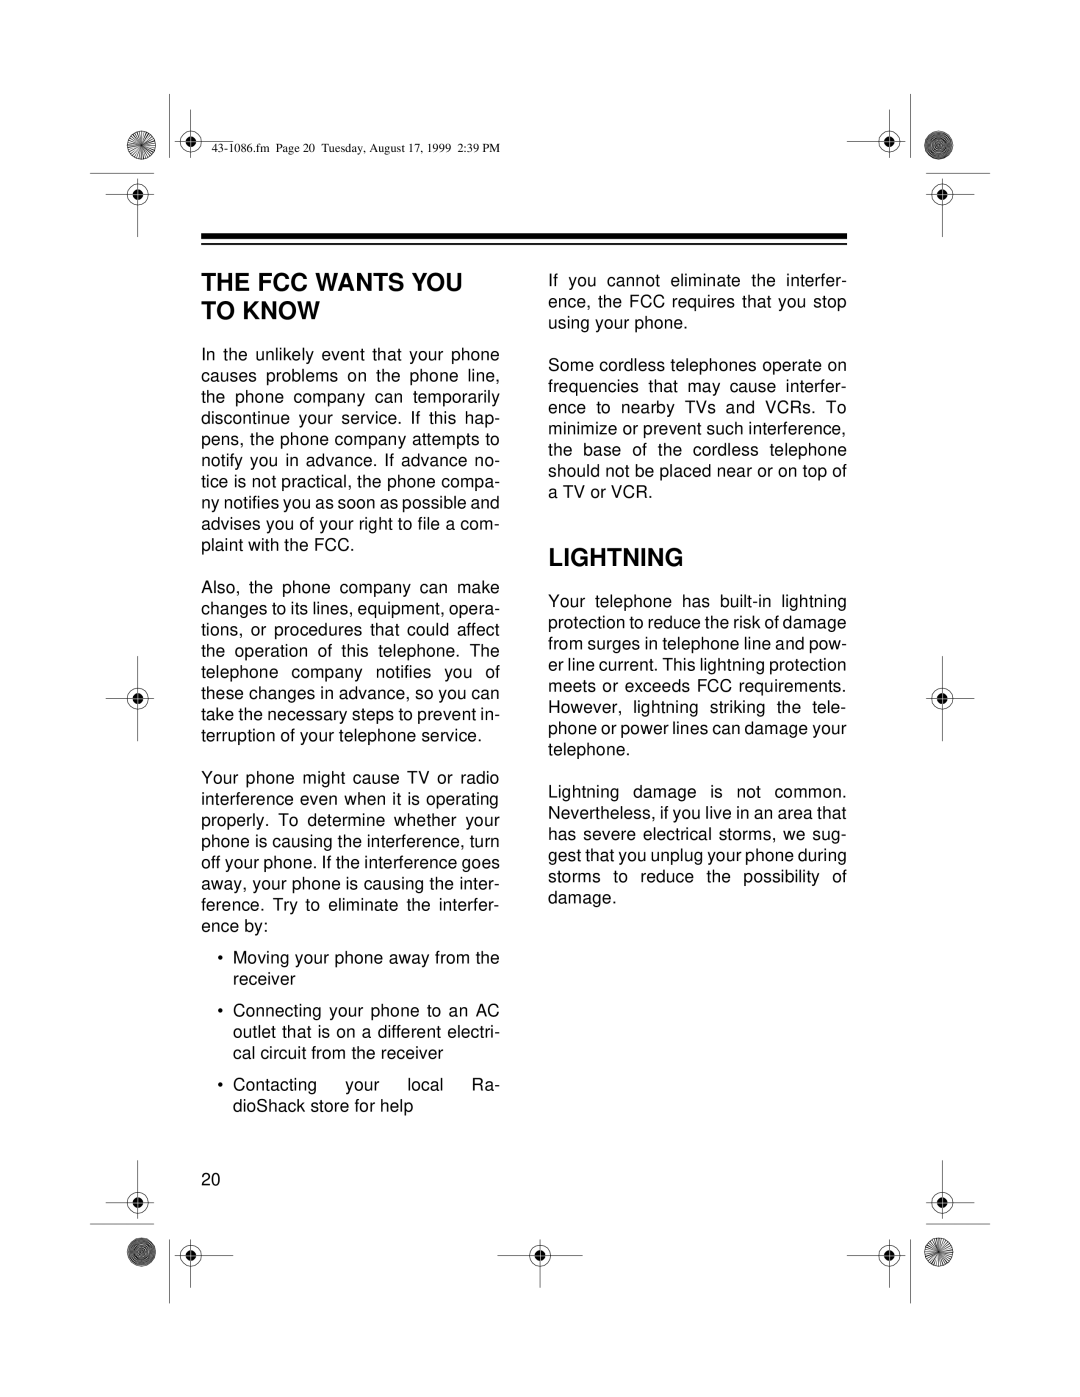 Radio Shack ET-916 owner manual The Fcc Wants You To Know, Lightning 